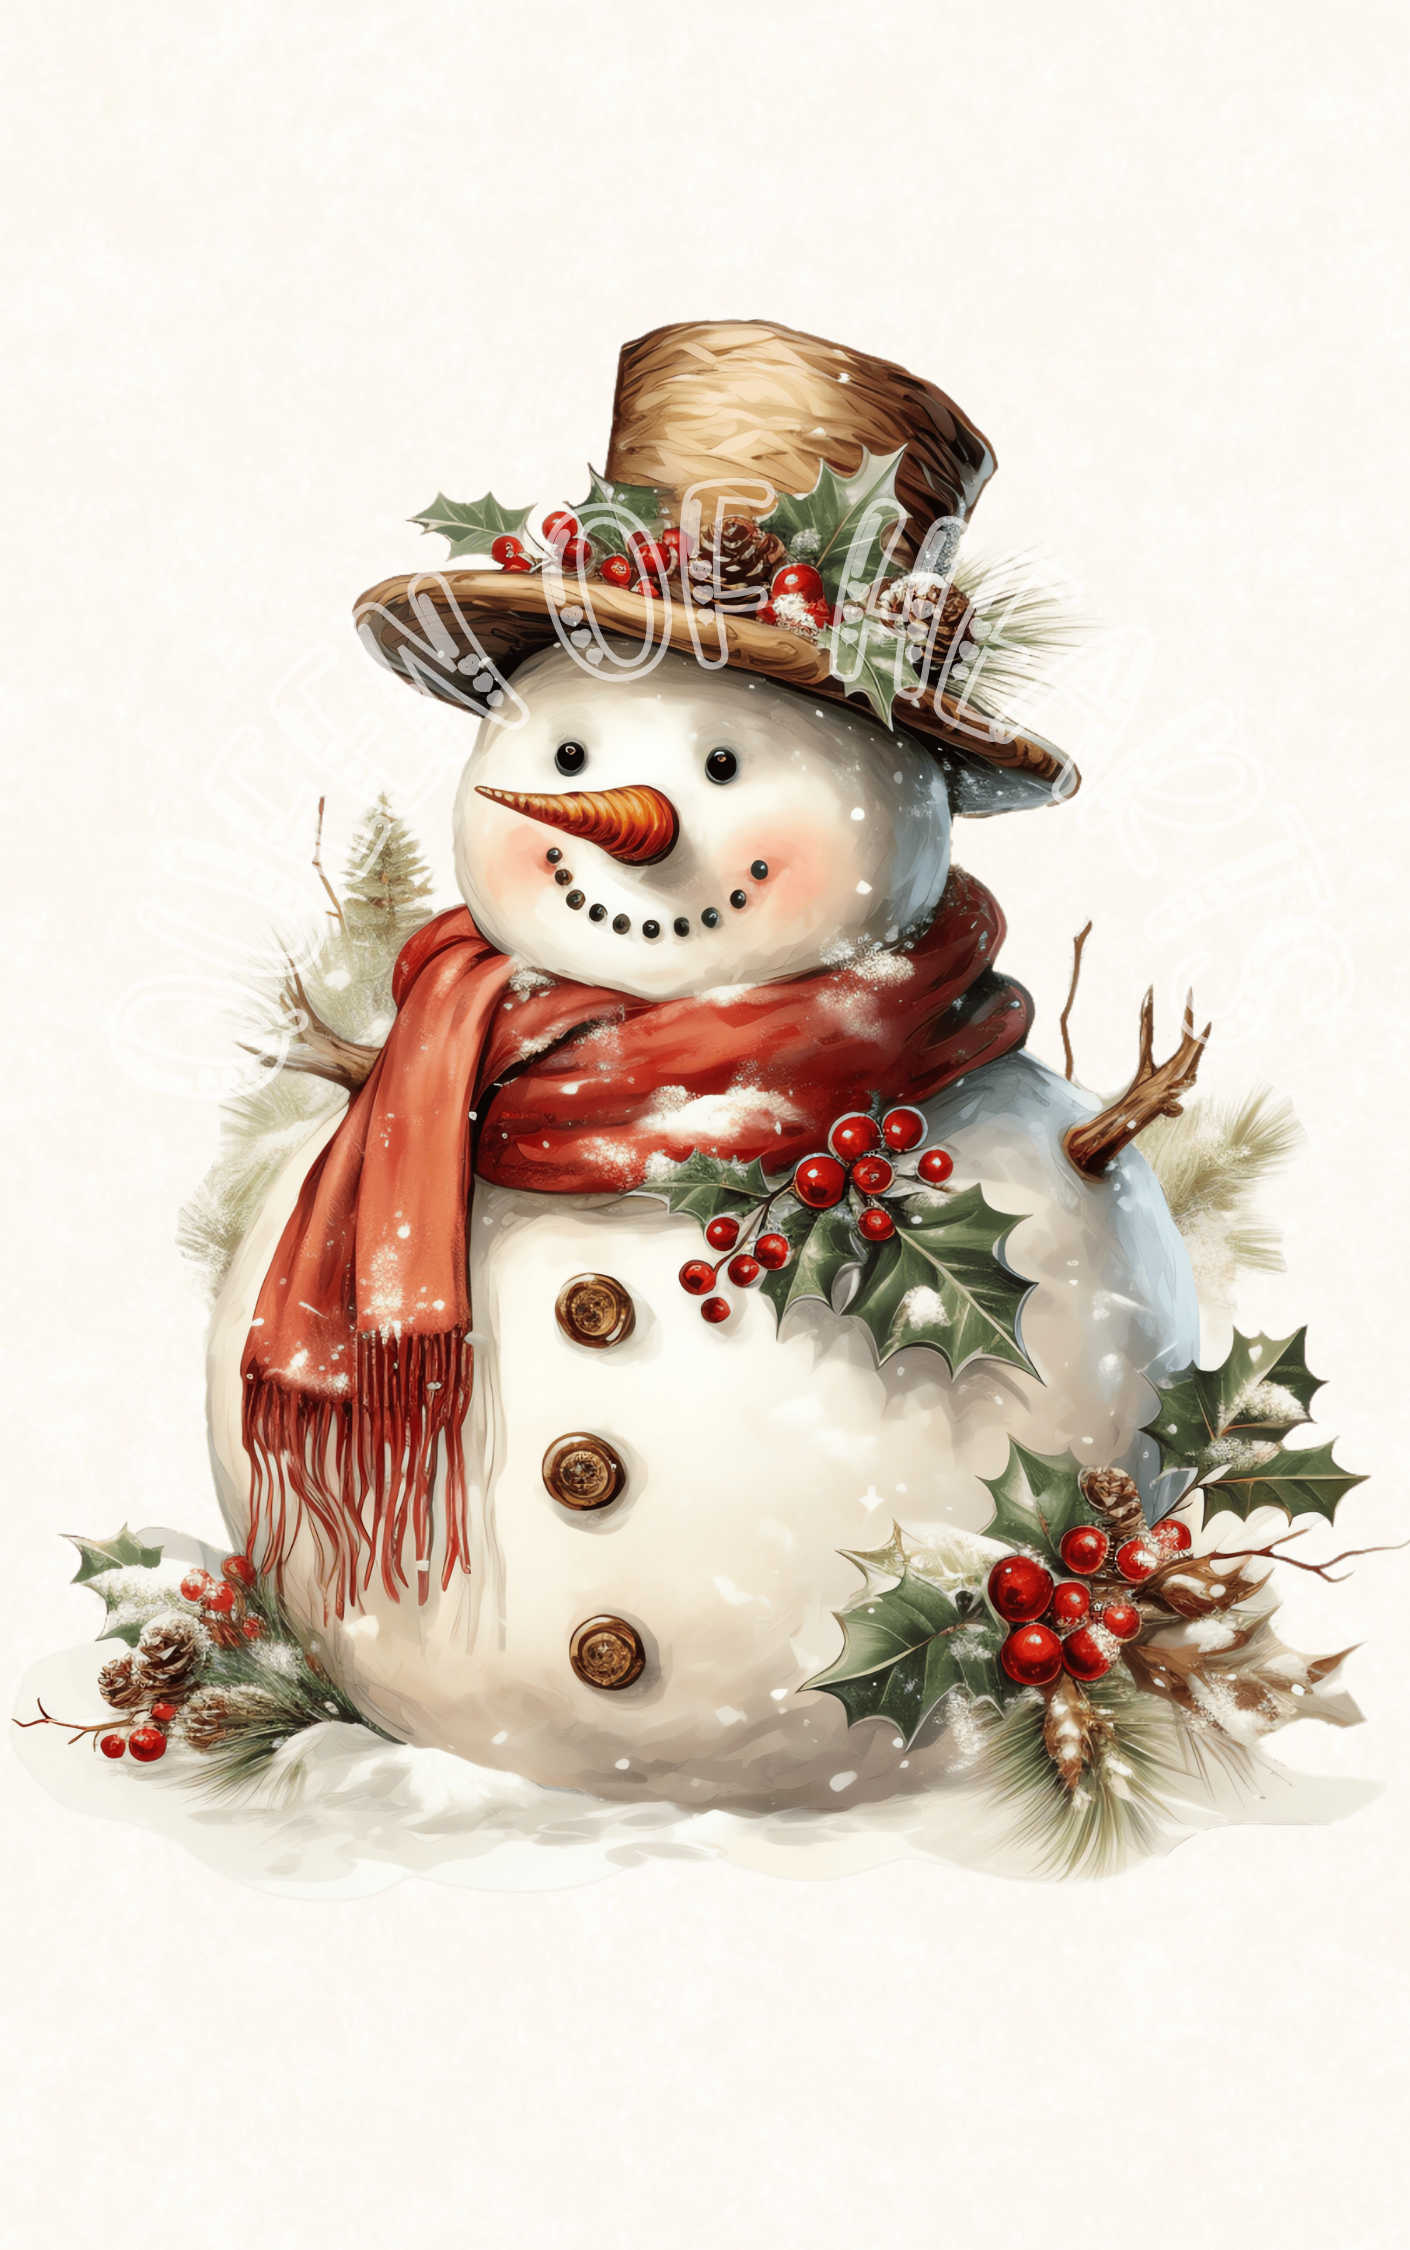 Queen of Hearts Rice Paper Prints - Retro Christmas Snowman